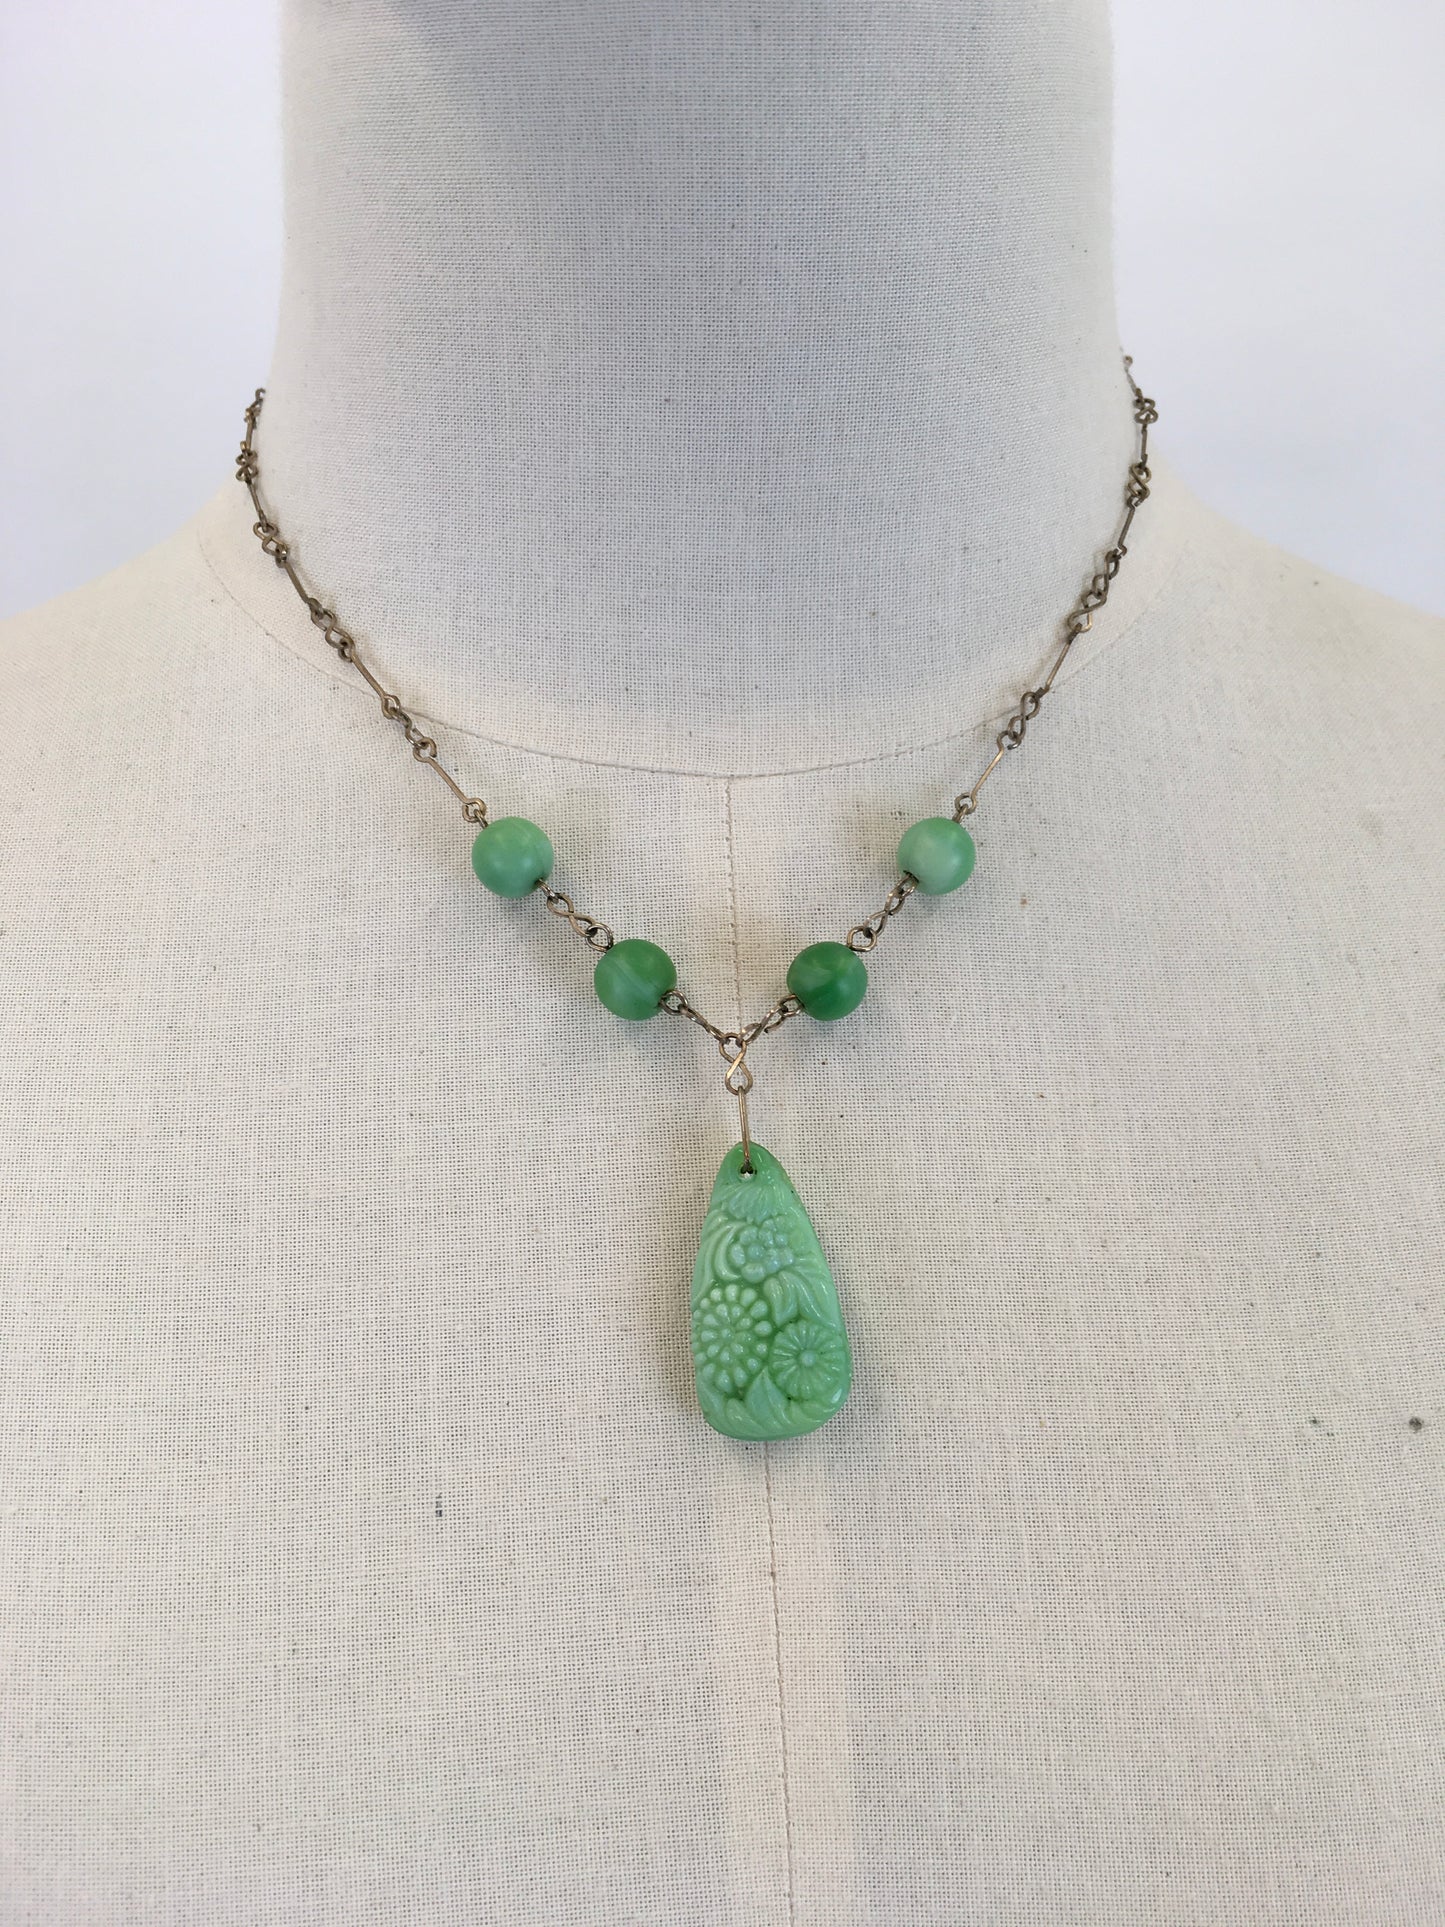 Original 1930s Necklace In The Iconic 30’s Green - Glass Beads and Pressed Glass